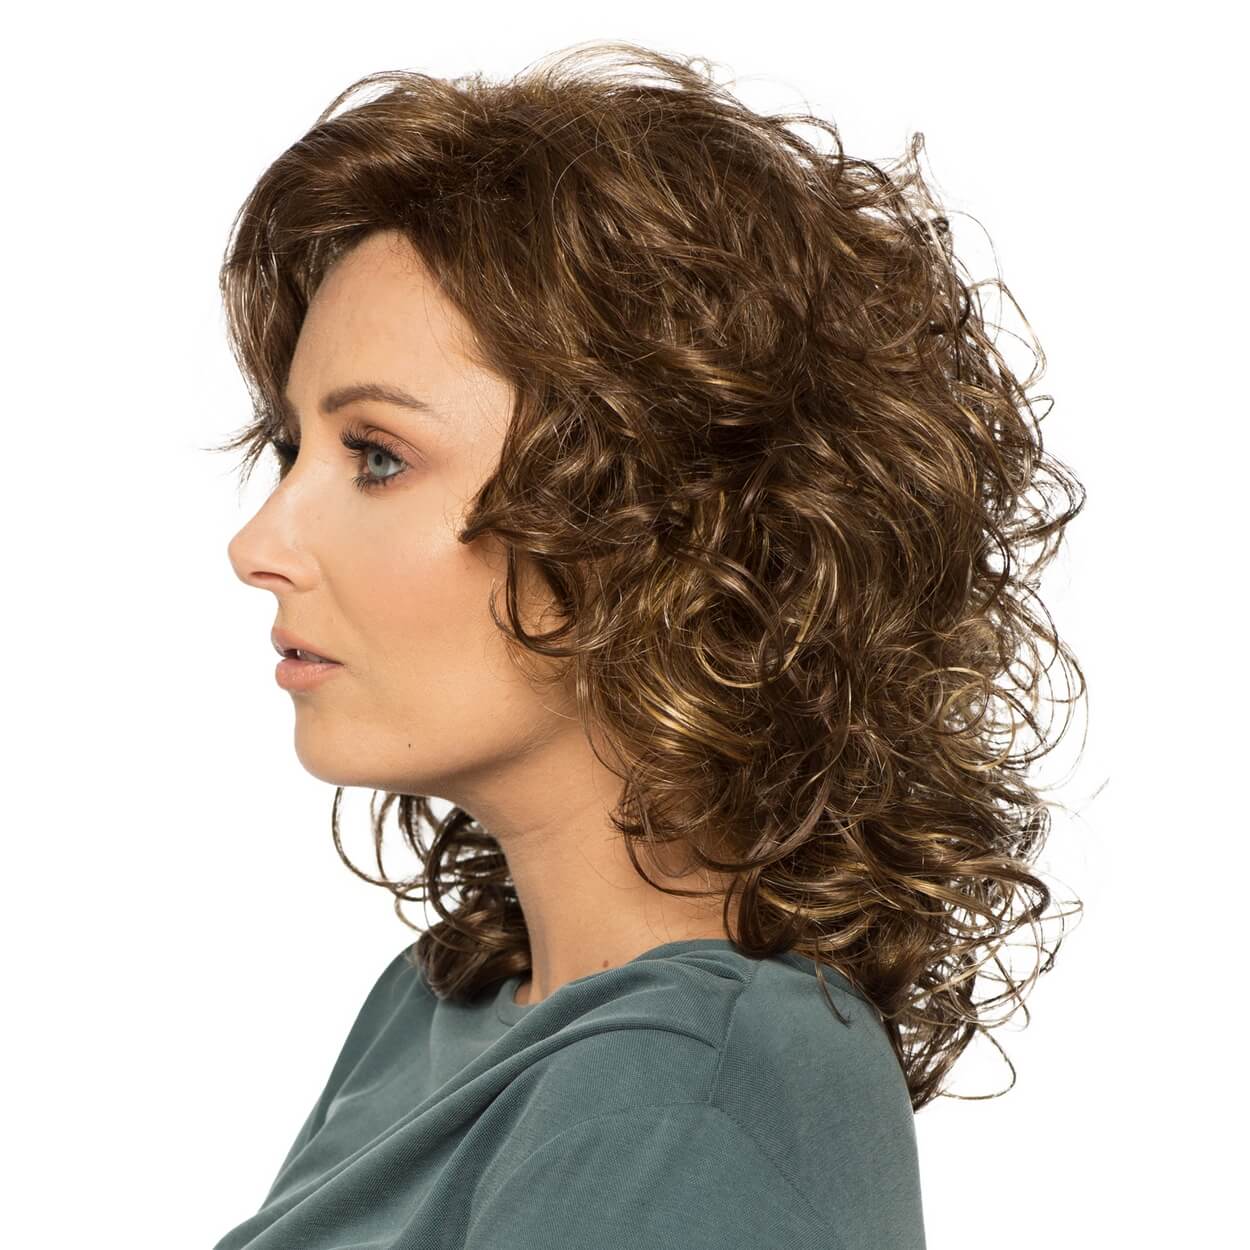 Poppy by Wig Pro in Camel Brown Image 2